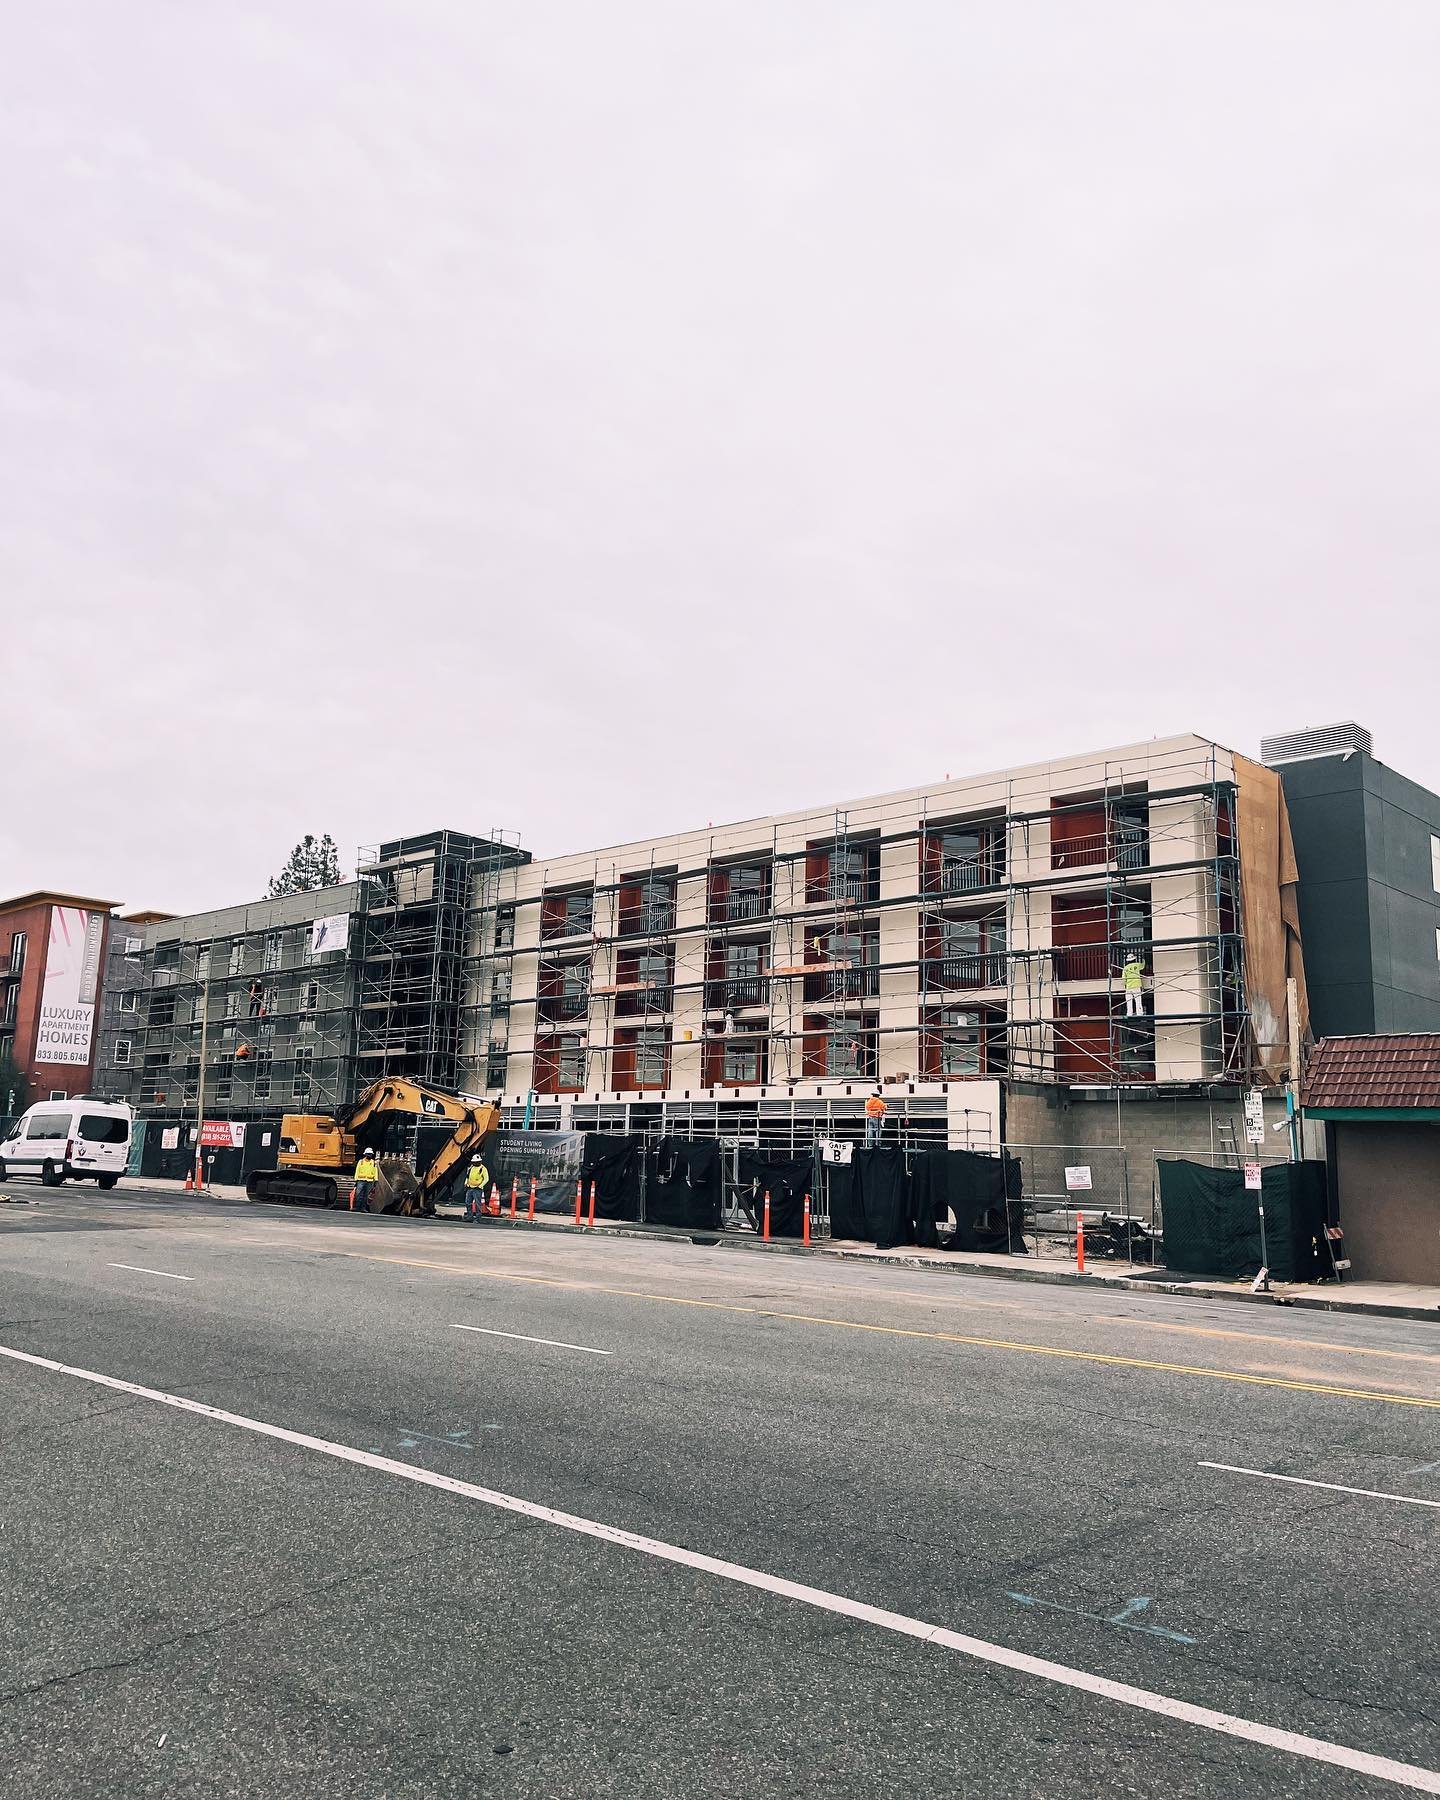 1 2 8 units currently L O A D I N G &bull; CSUN Student housing COMING SOON // interior + exterior paint finishes by @elliscustompainting 💪🏼
.
.
.
#newconstruction #mixeduse #csunorthridge #studenthousing #laliving &bull; www.elliscustompainting.co